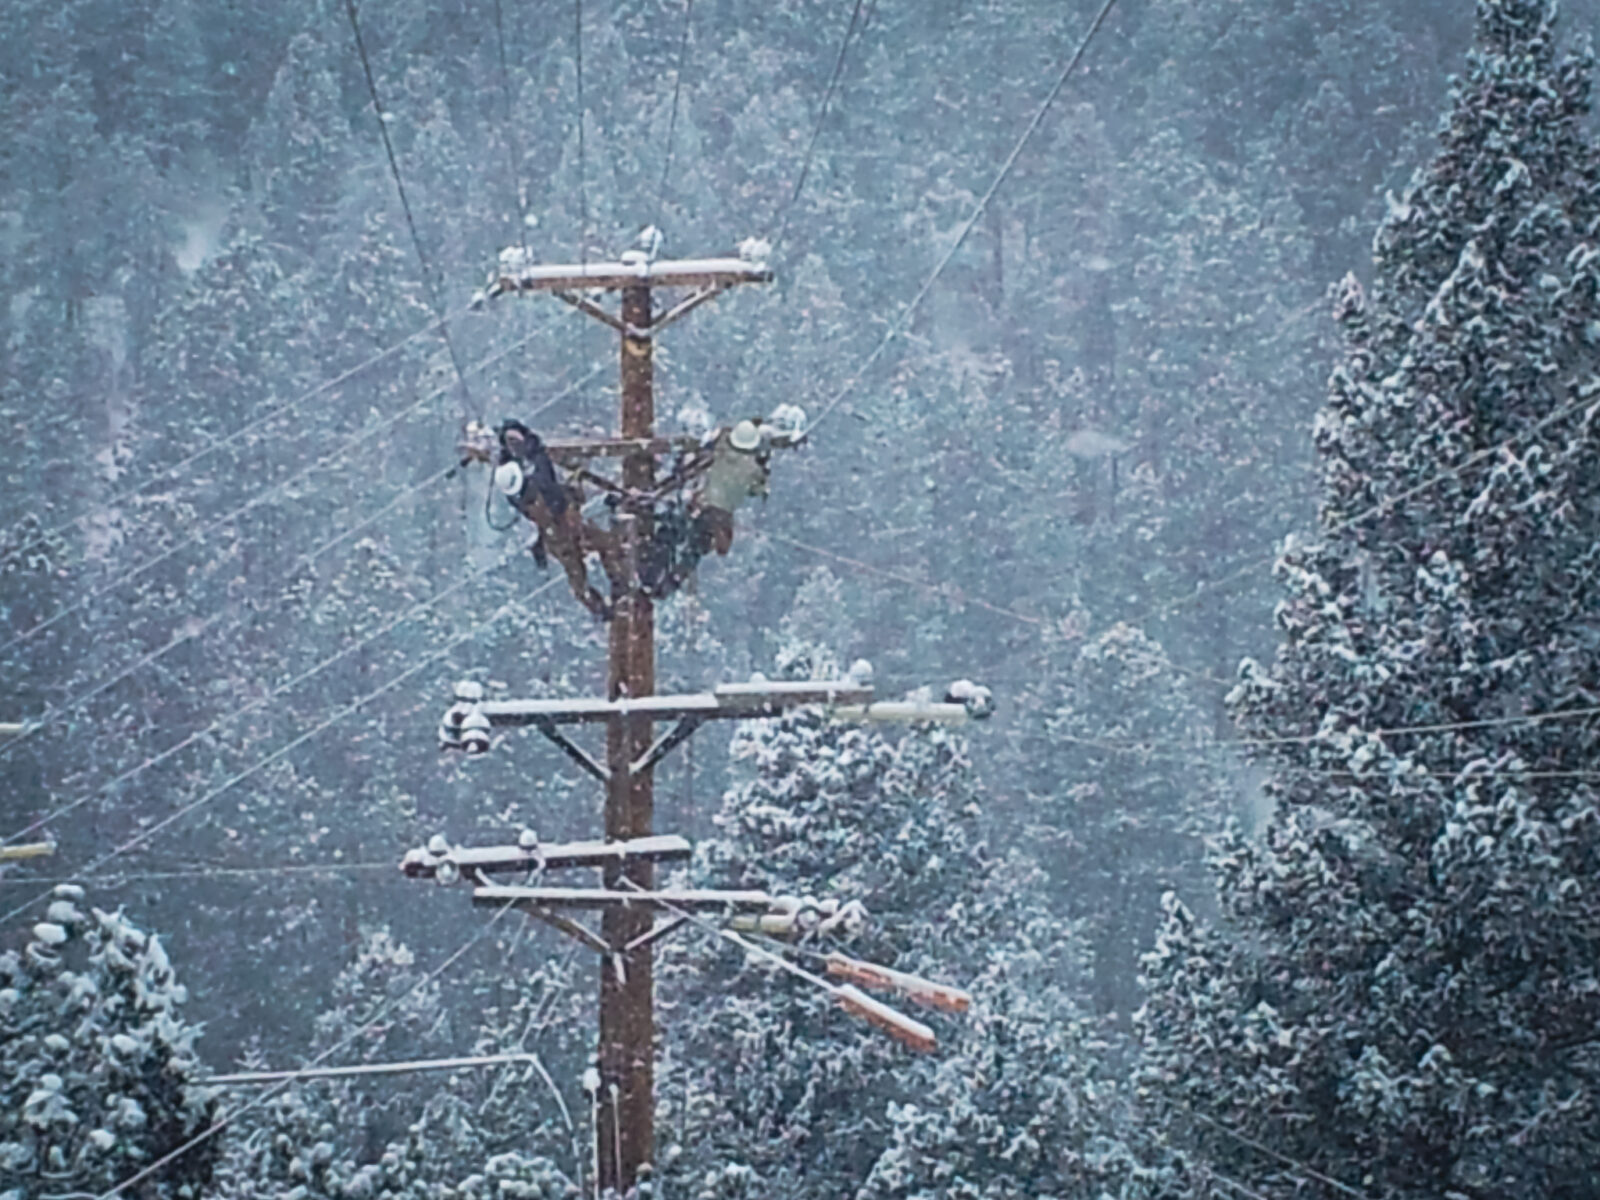 Two construction workers on a power line in the snow